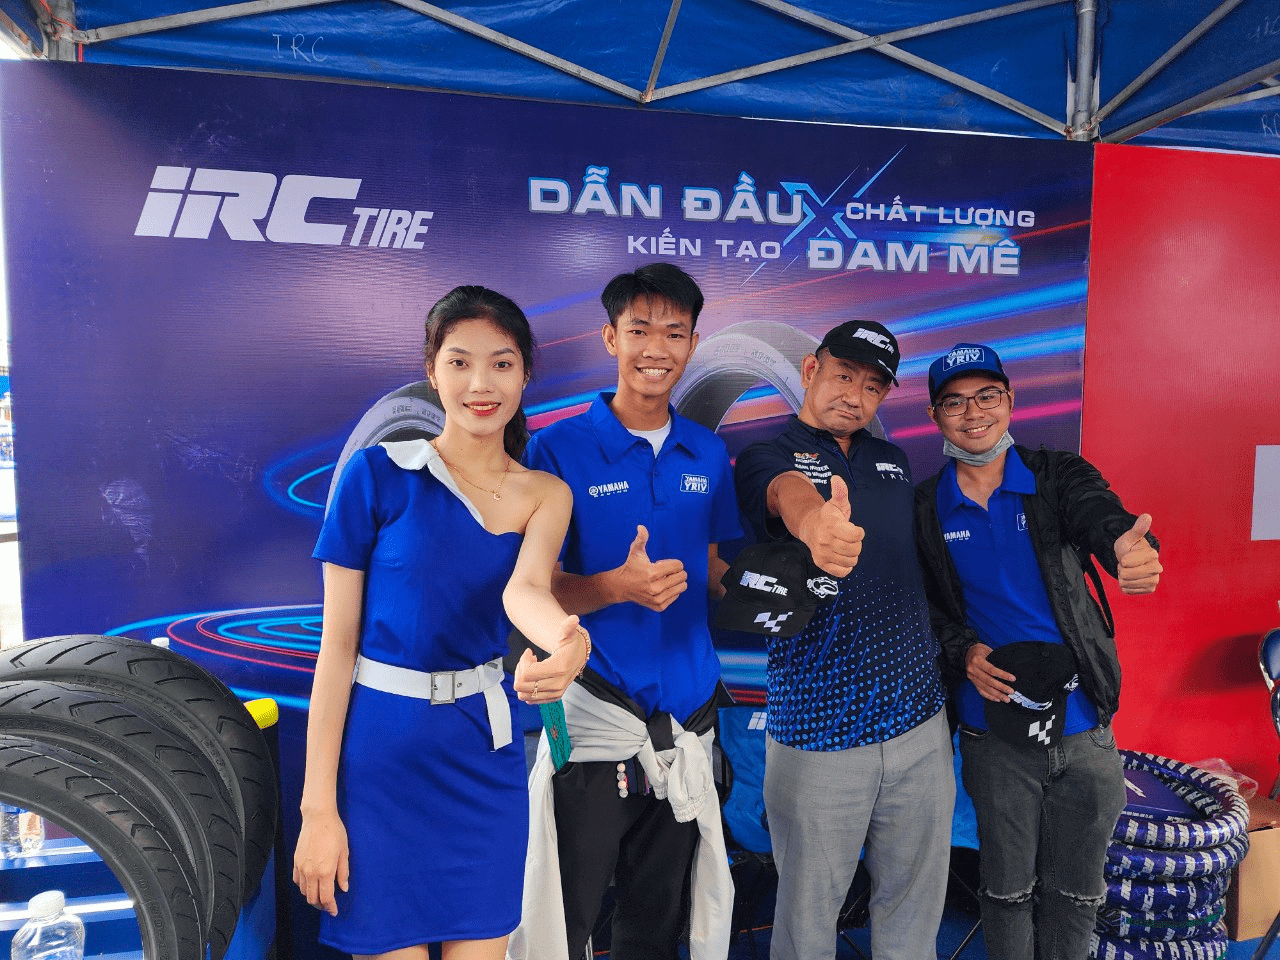 2023 YAMAHA RACING INSTITUTE OF VIETNAM THE SPEEDIER THE RACE - THE HYPER THE RIDE